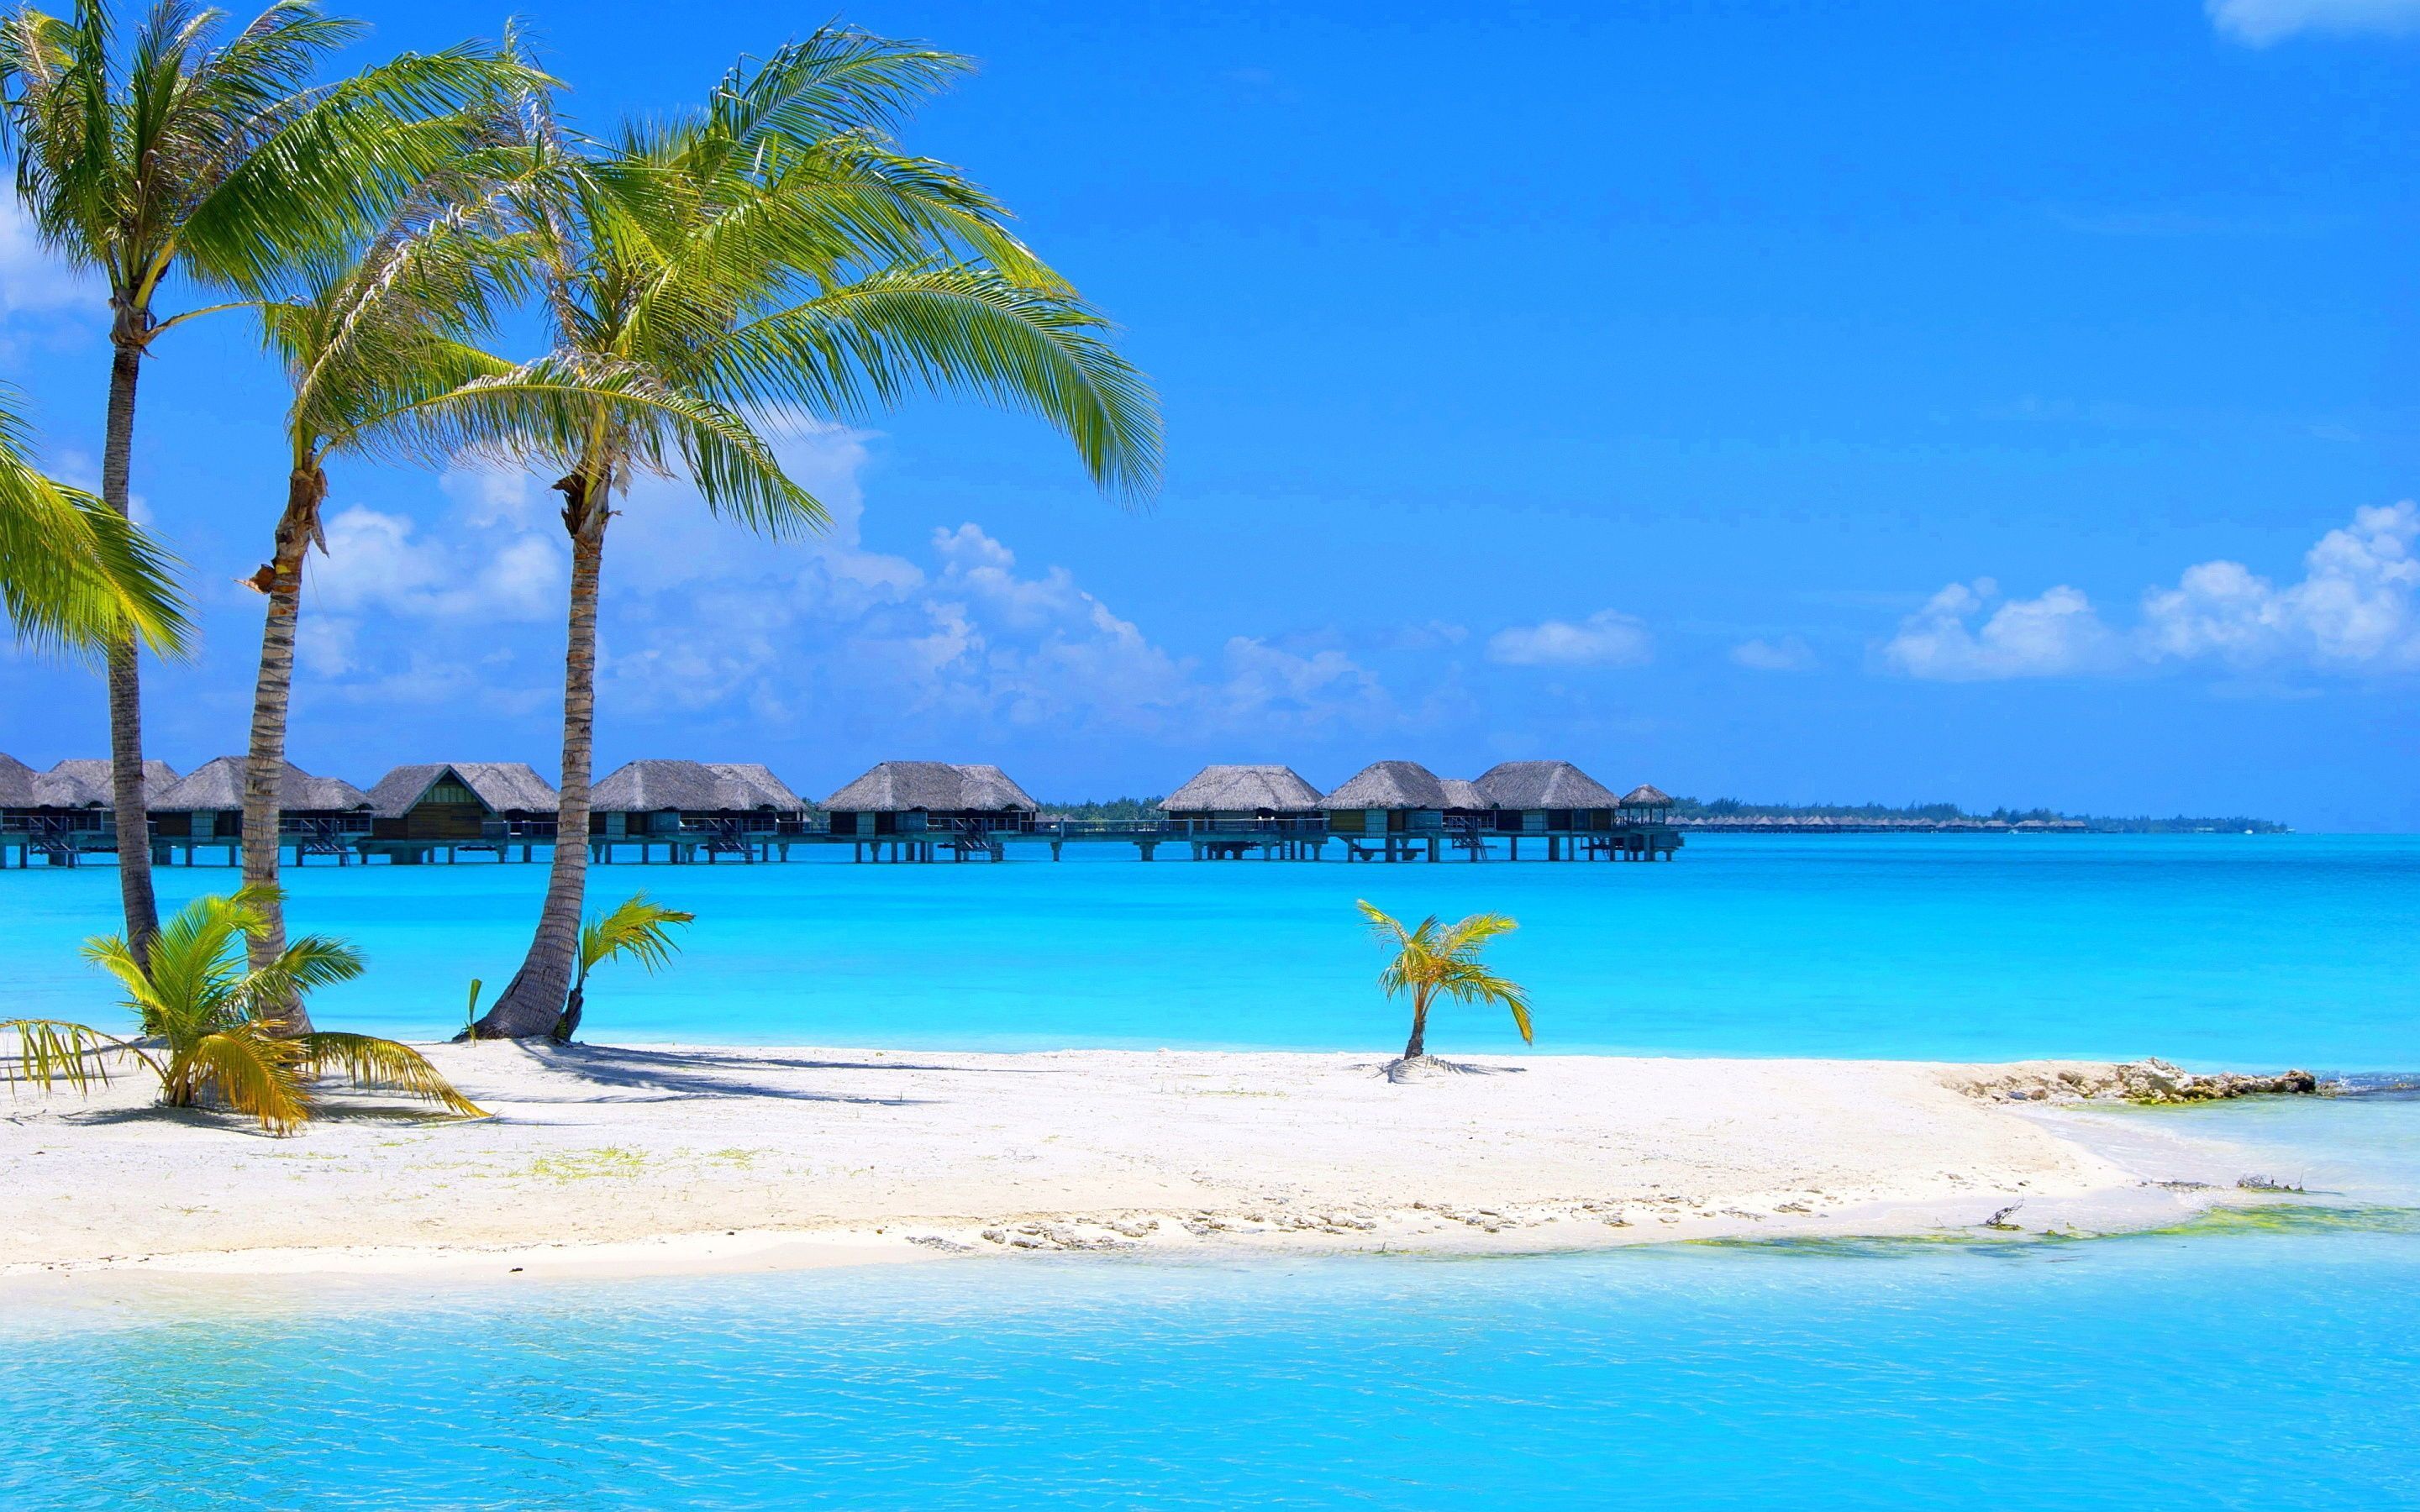 Most beautiful beach hd wallpaper download beach images free PC